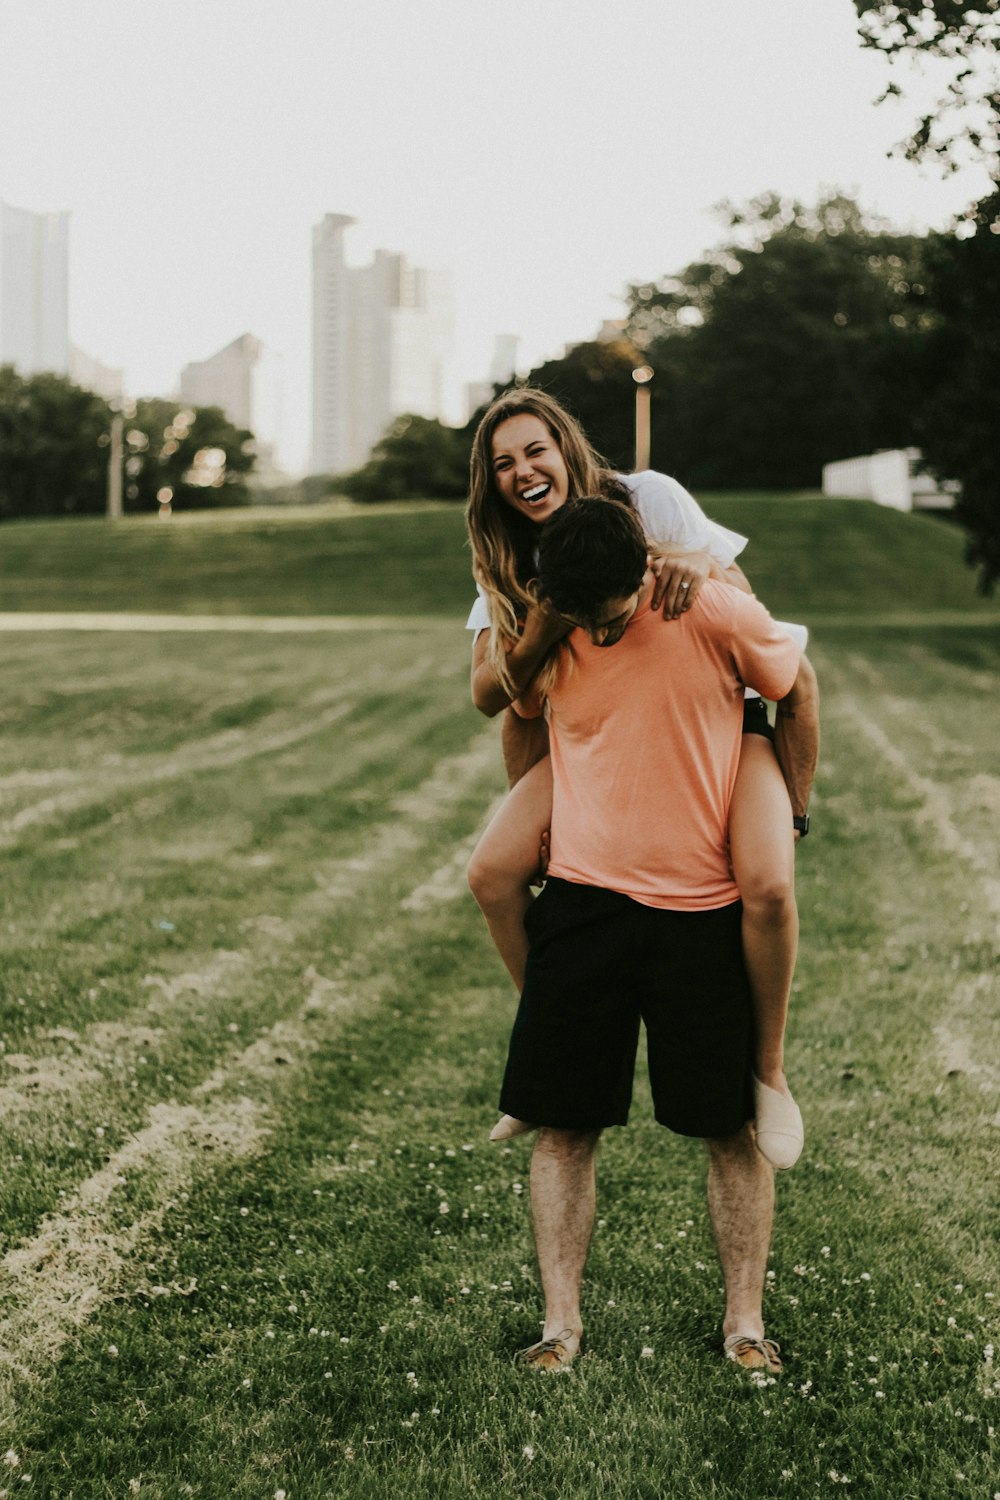 selective focus photography of man carrying woman on grass field